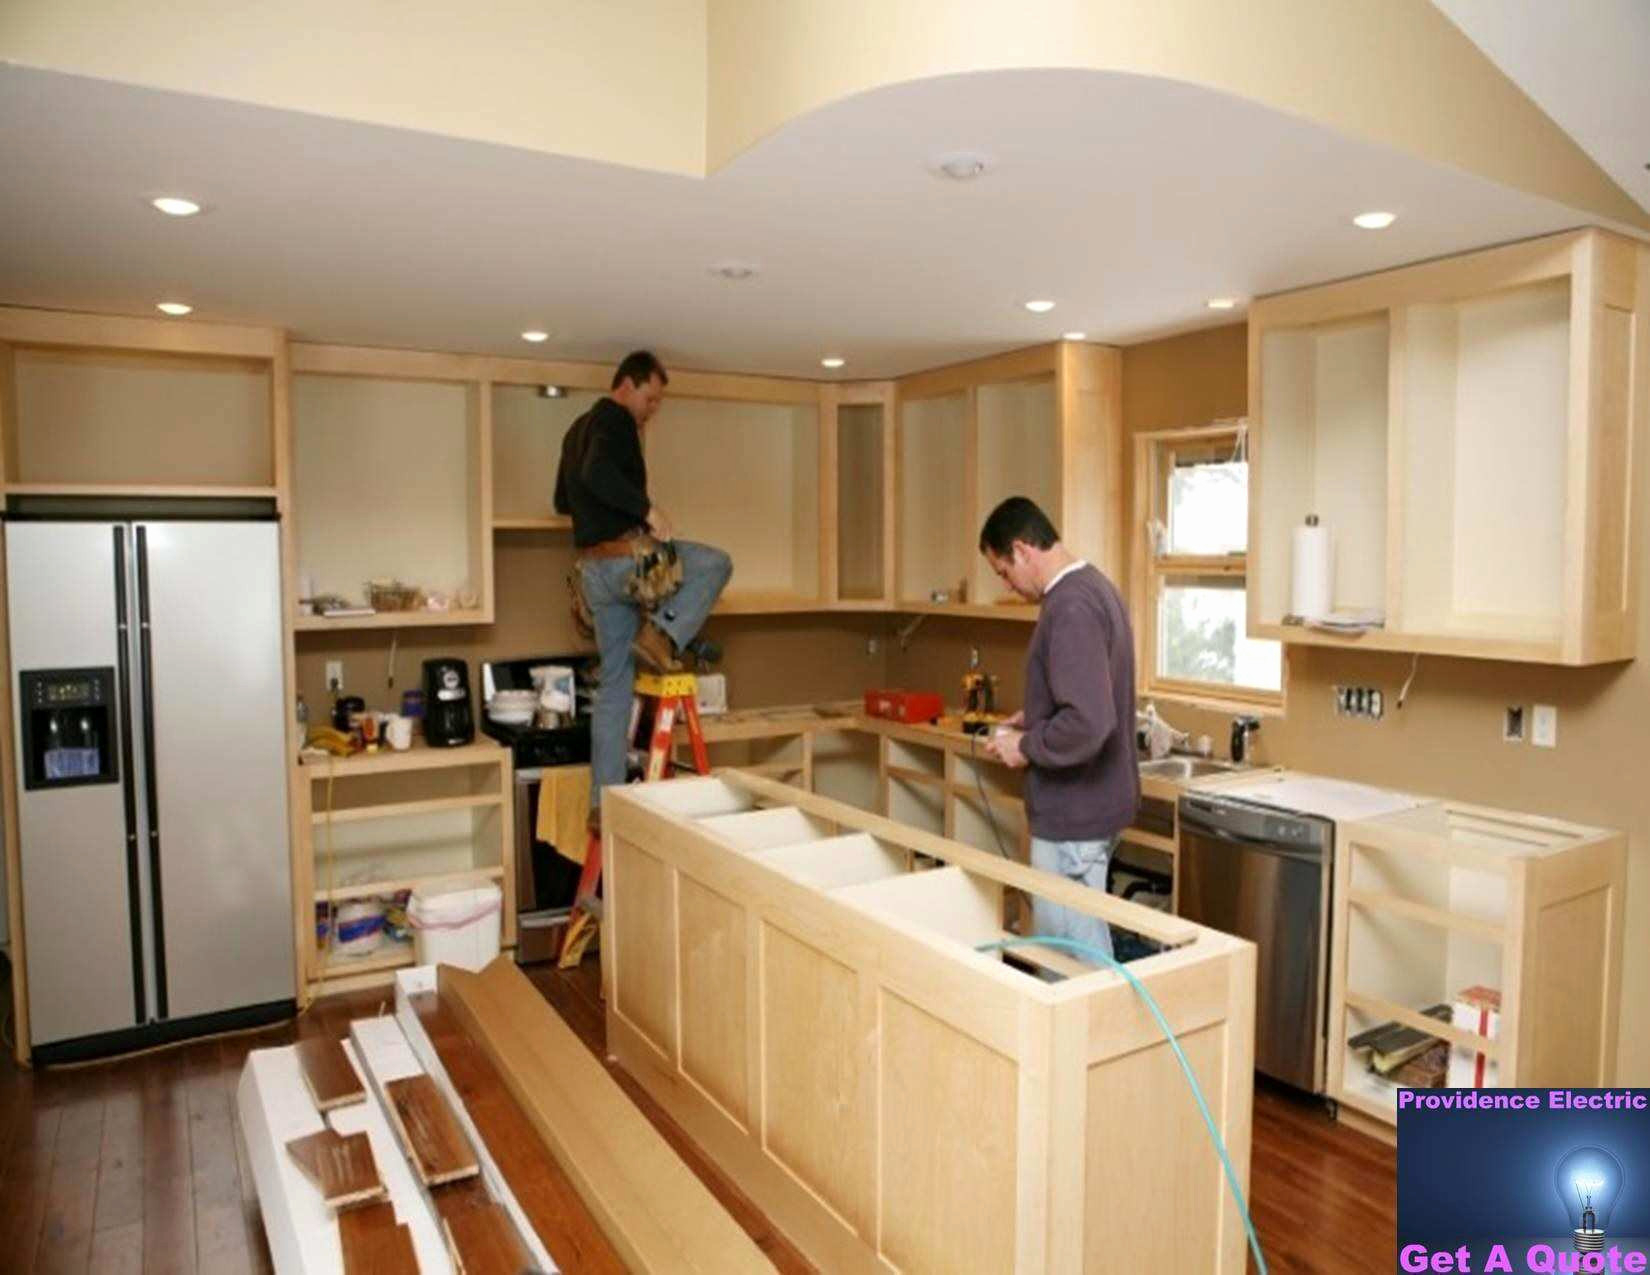 10 Fantastic Recessed Lighting In Kitchens Ideas prepossessing kitchen with recessed lighting and kitchen with 2024